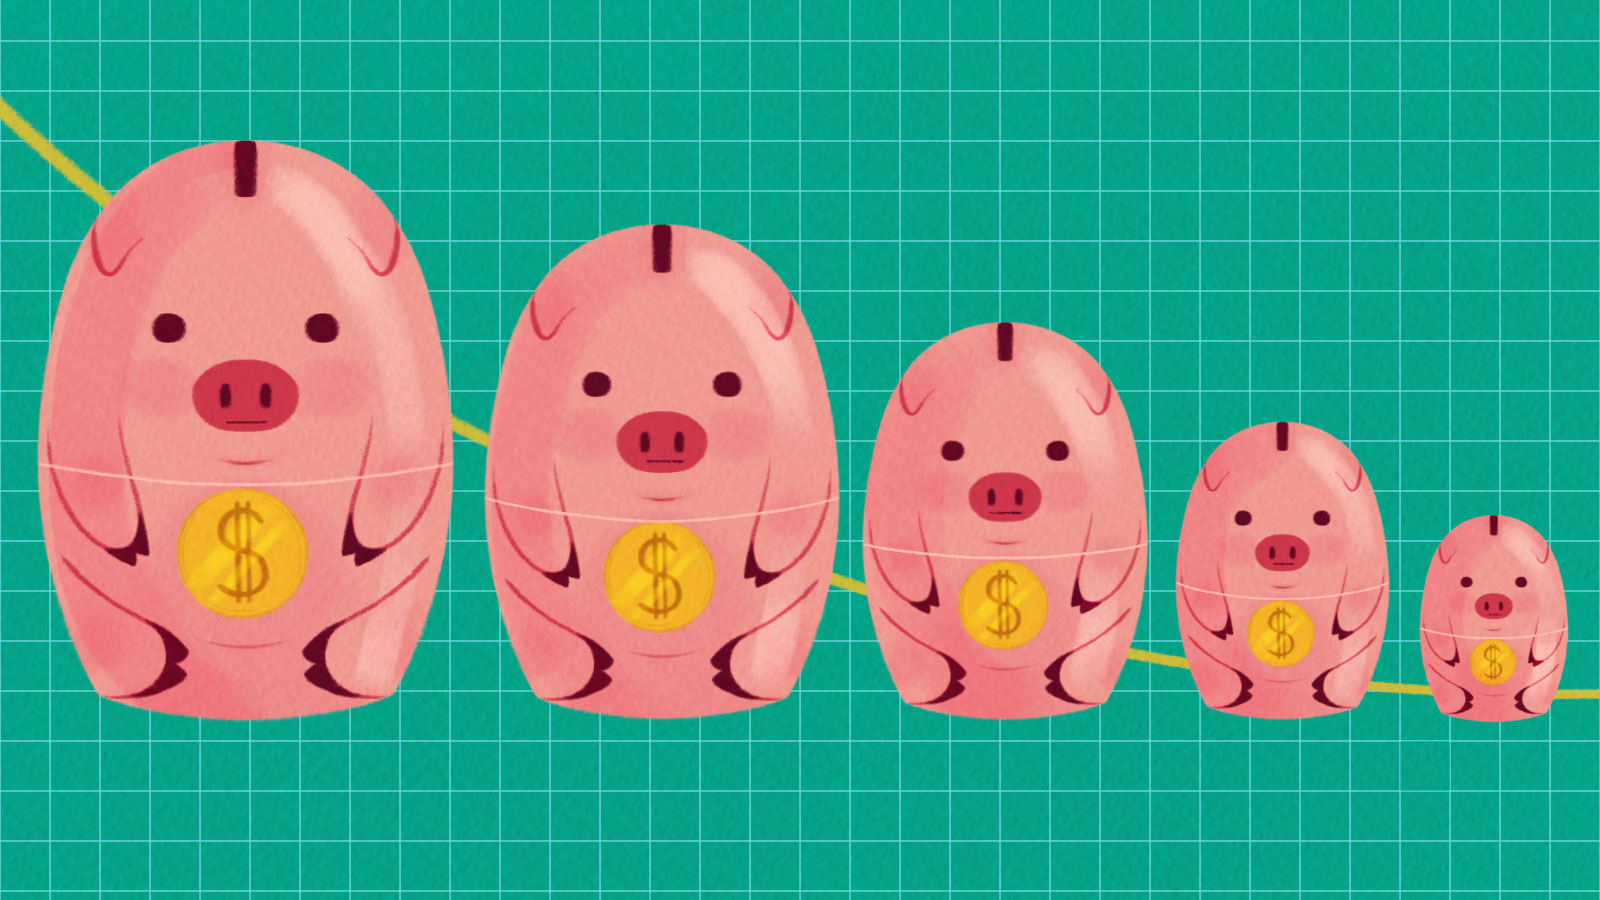 Pig nesting dolls in a line from large to small